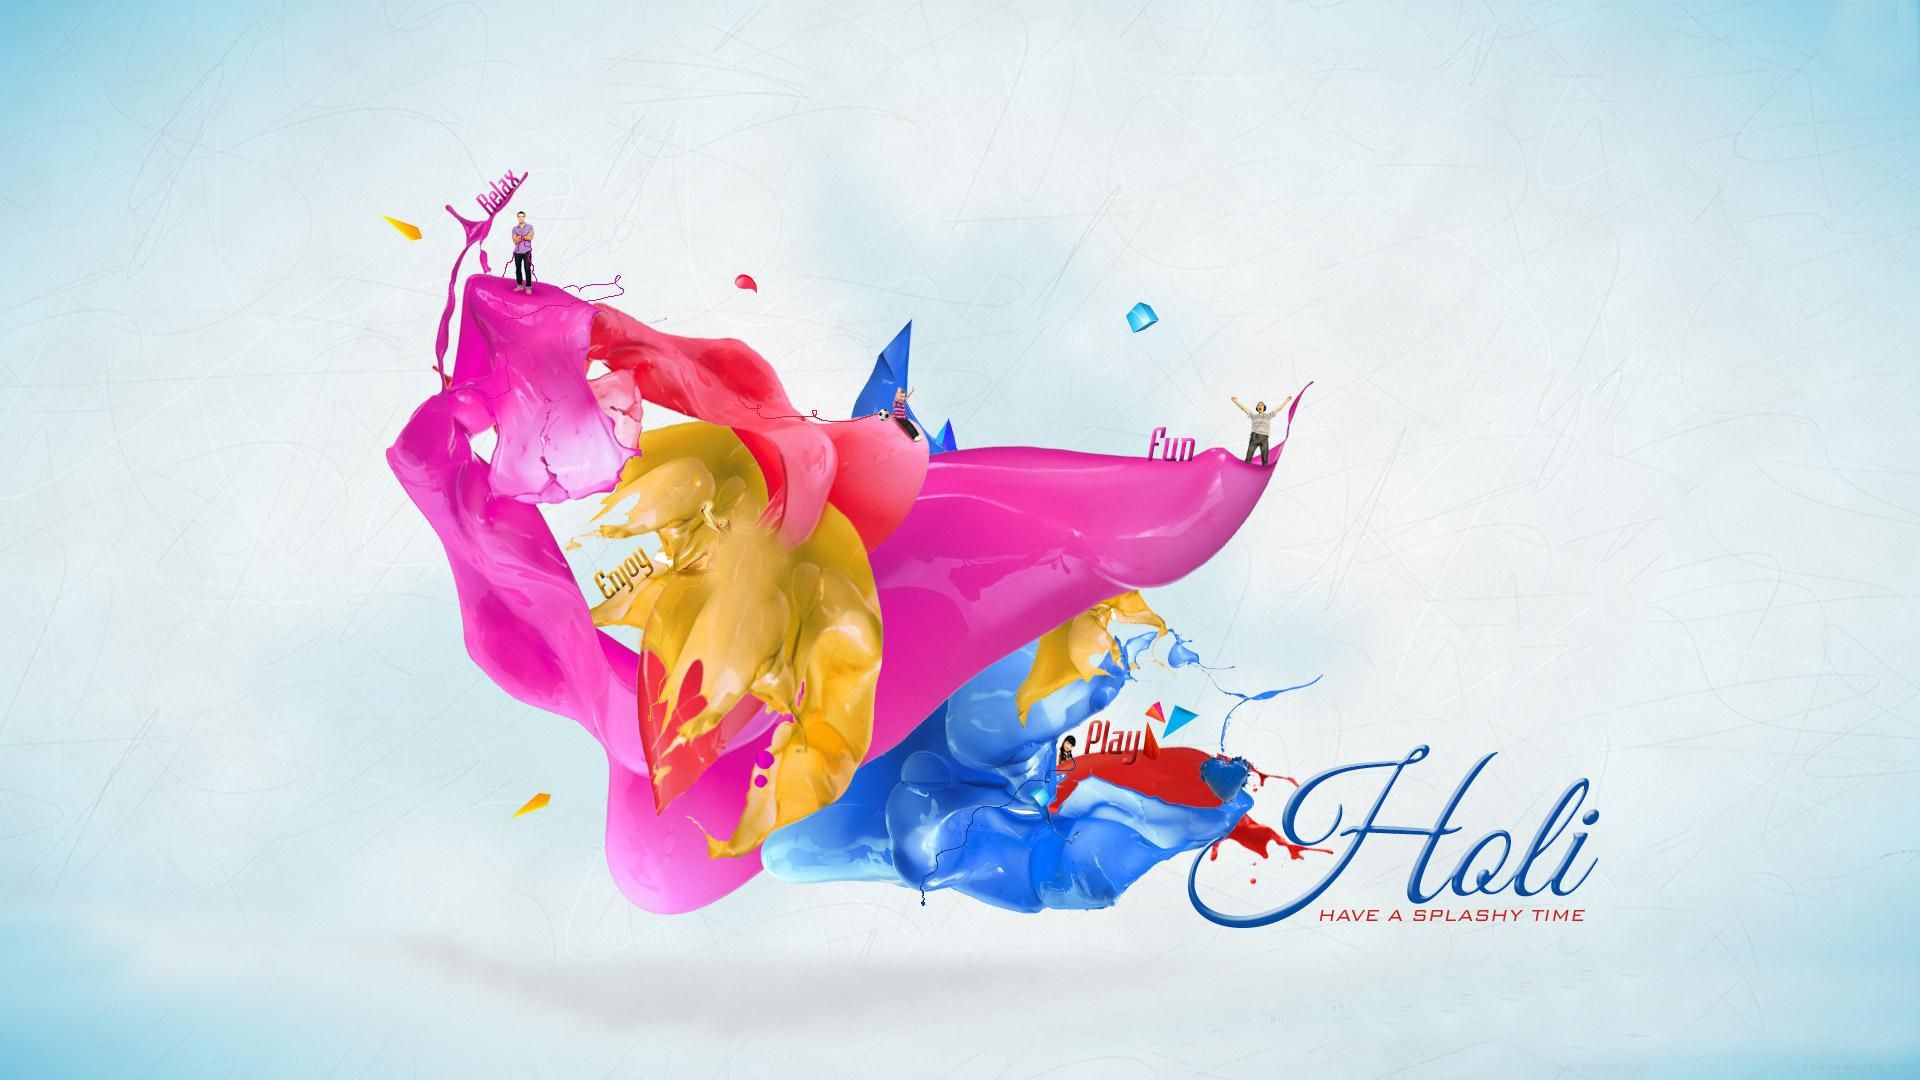 Download Holi HD wallpaper for samsung phones wallpaper and image for your mobile cell phone